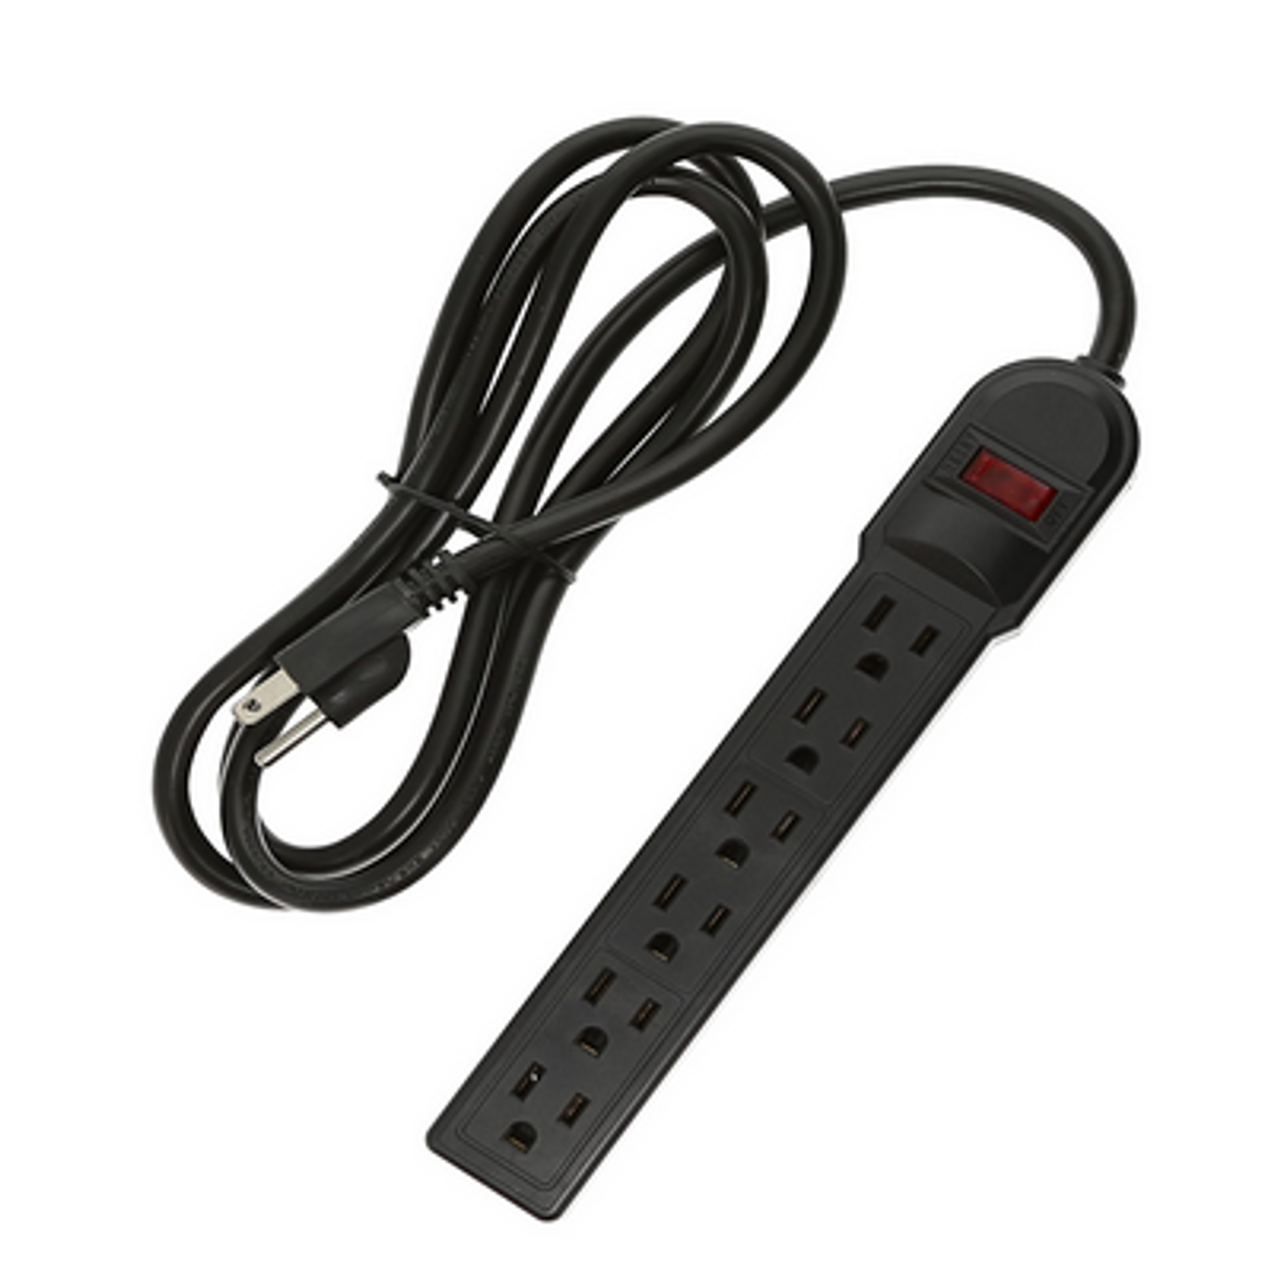 6 Outlet Surge Protector Power Strip w/ 6 ft. Cord, Black